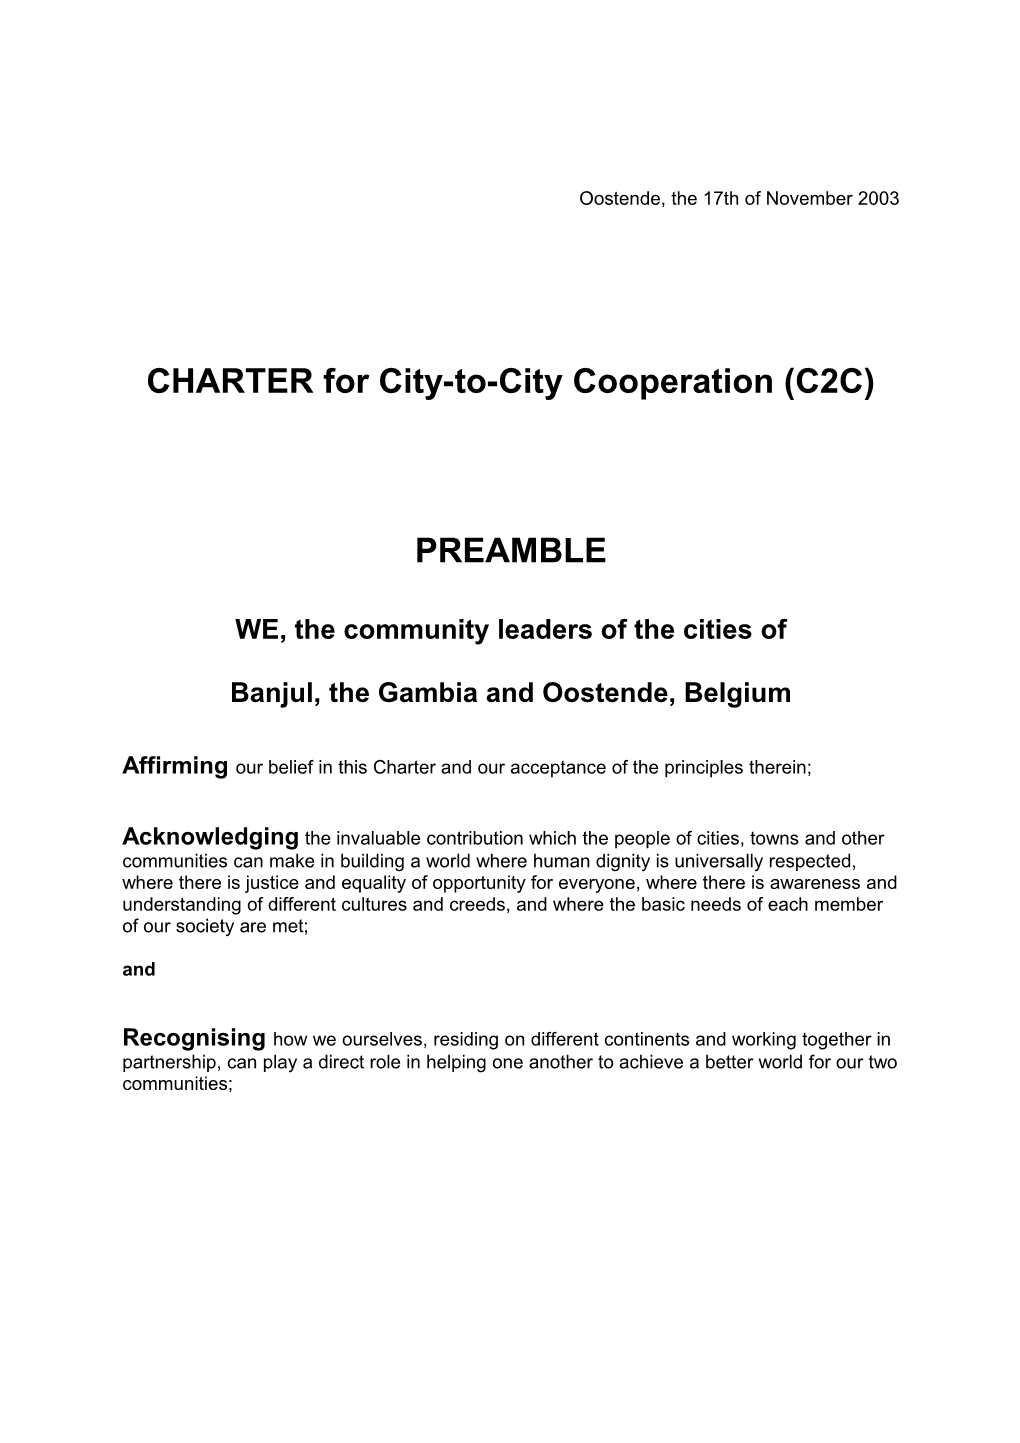 CHARTER for City-To-City Cooperation (C2C)